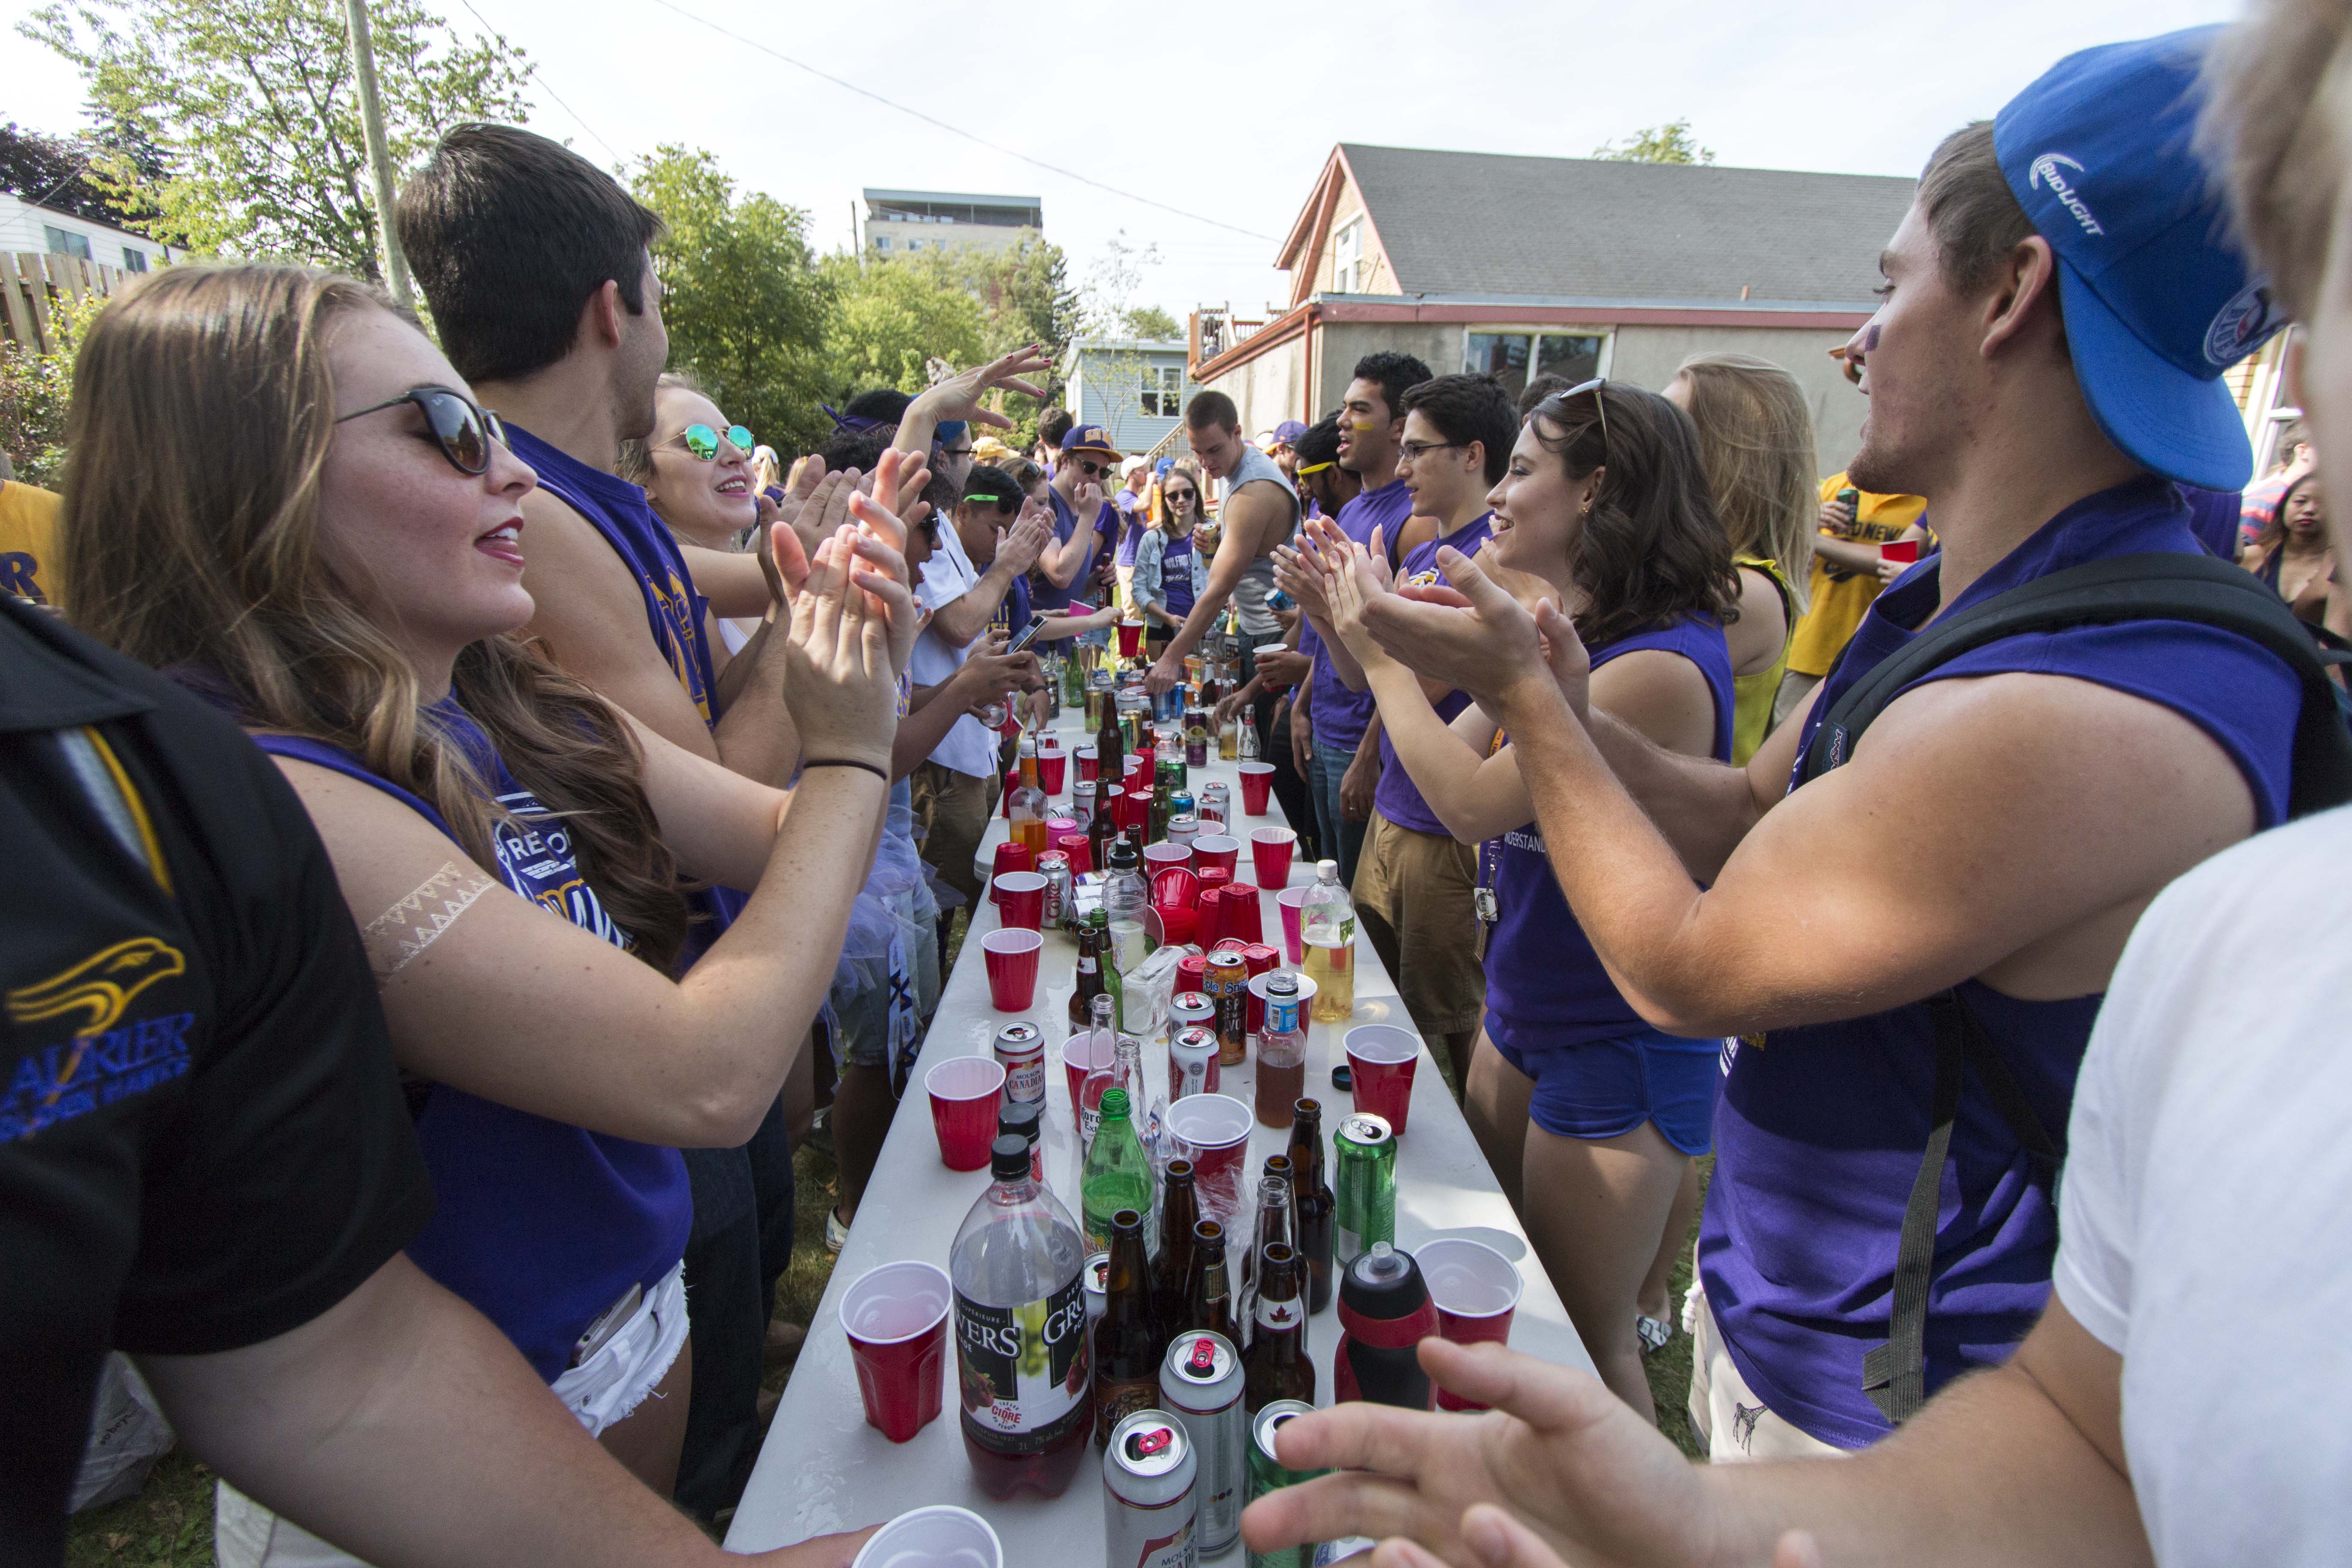 Students play a game of flip cup during Homecoming festivities. Photo by Jessica Dik